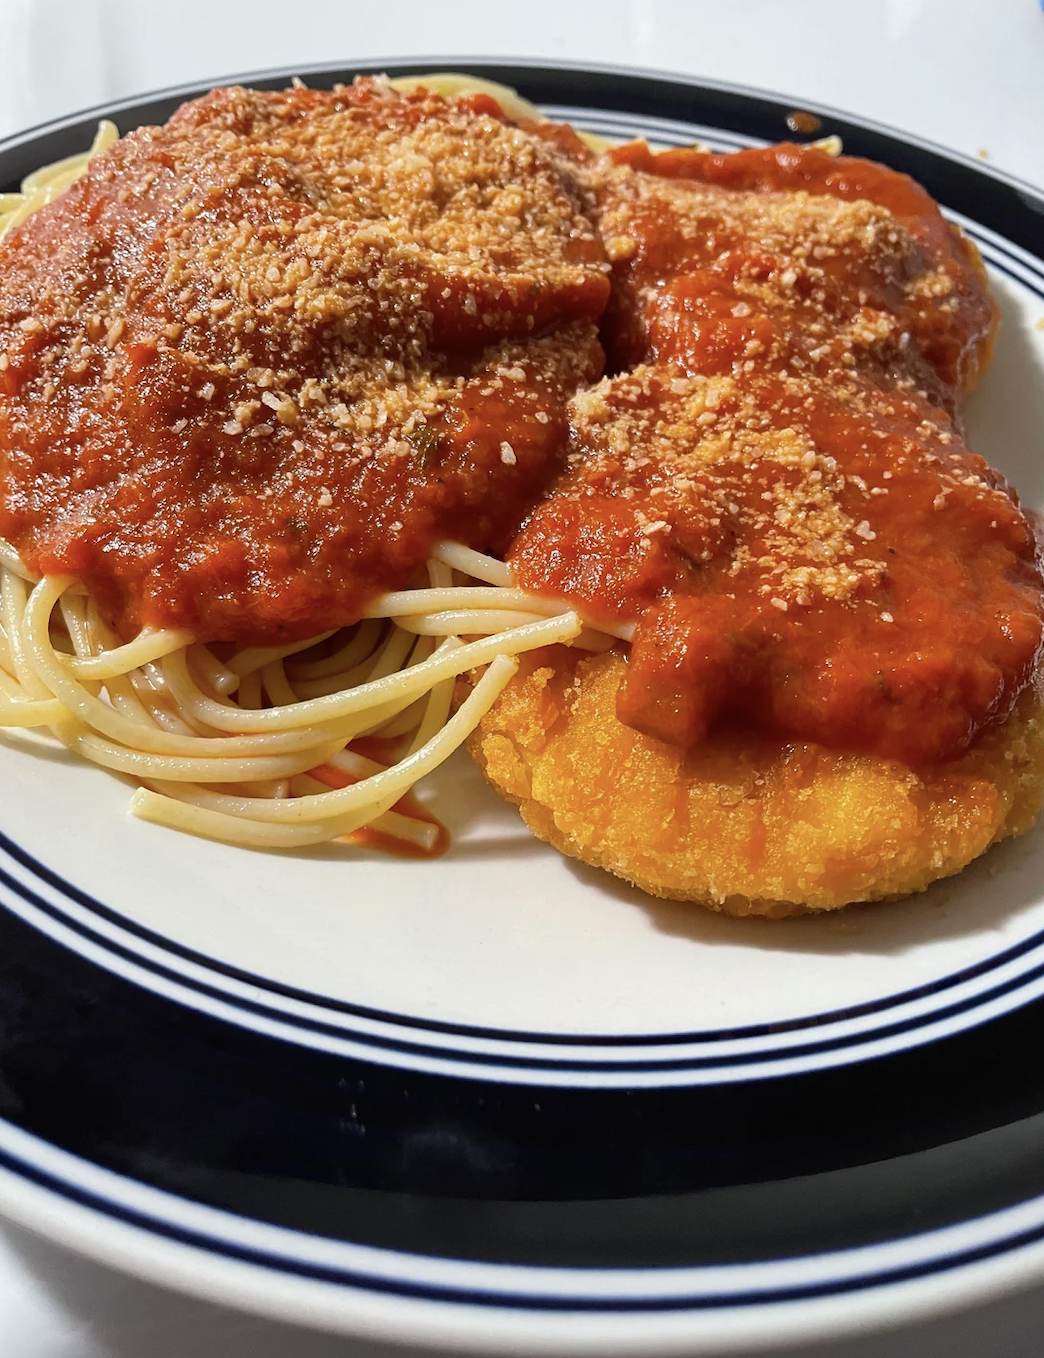 Plate with spaghetti, tomato sauce, breaded cutlets, and grated cheese